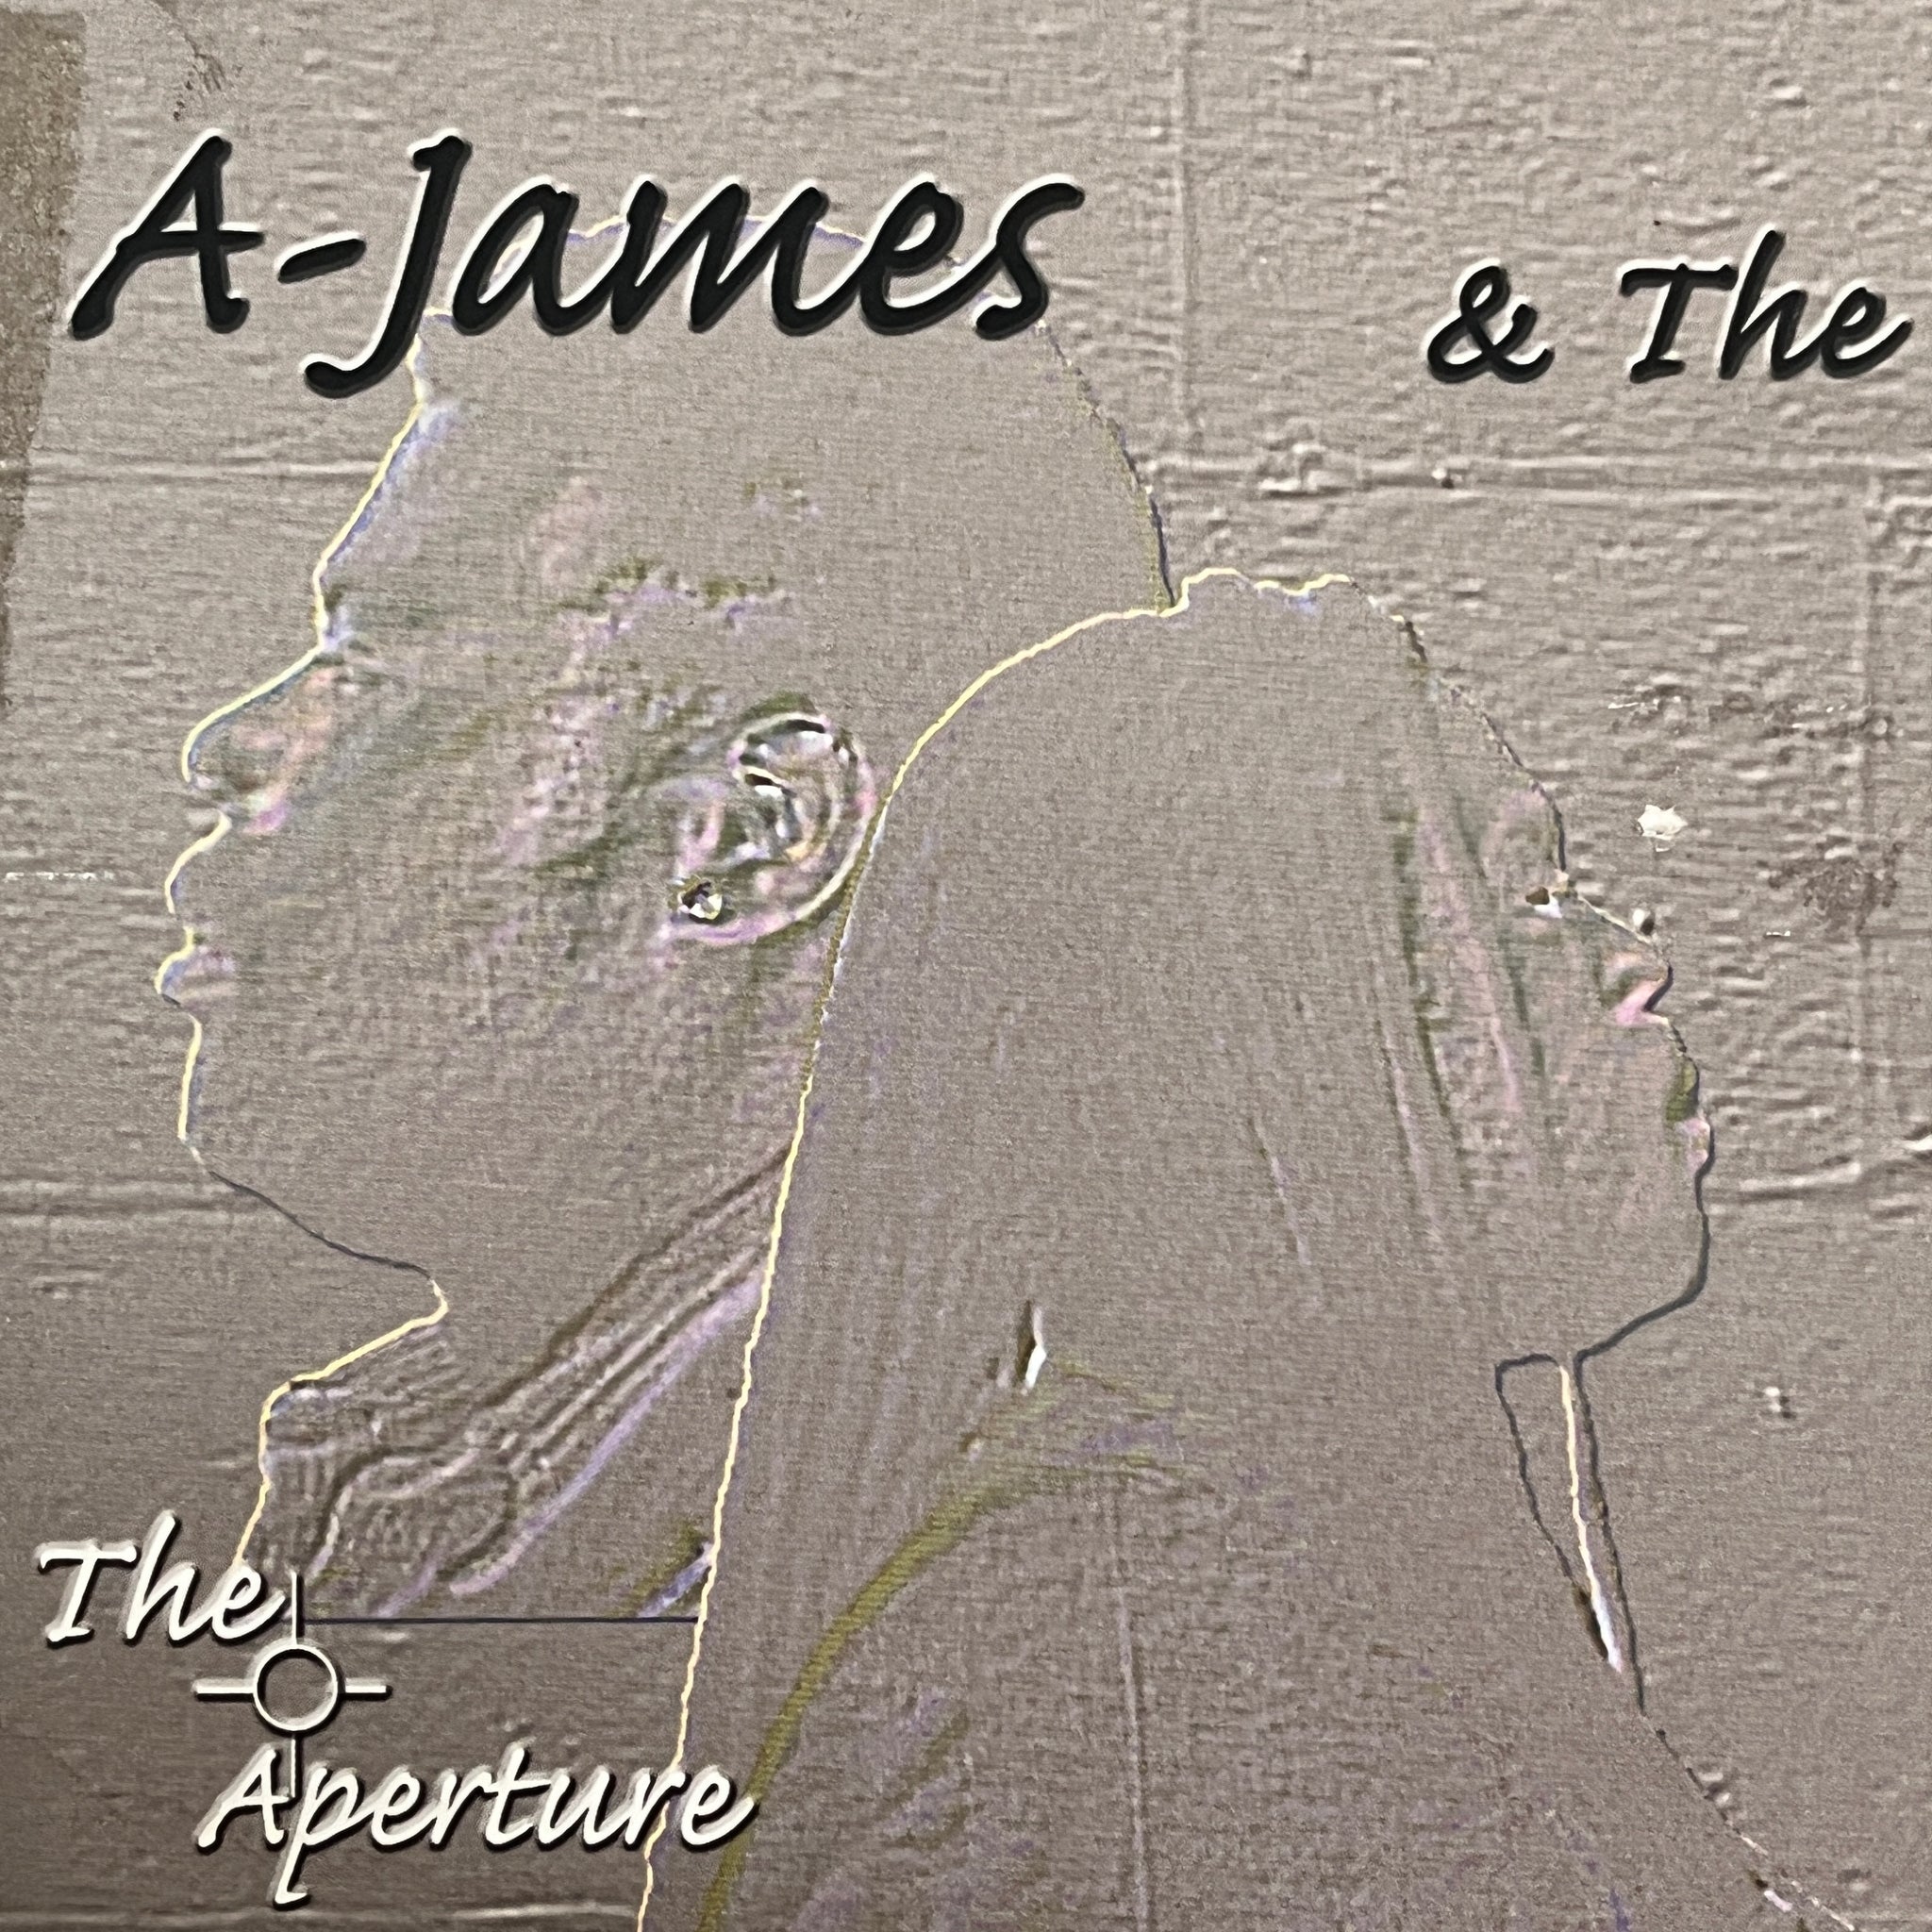 A-James & The GranDDaDDy – The Aperture (CD)